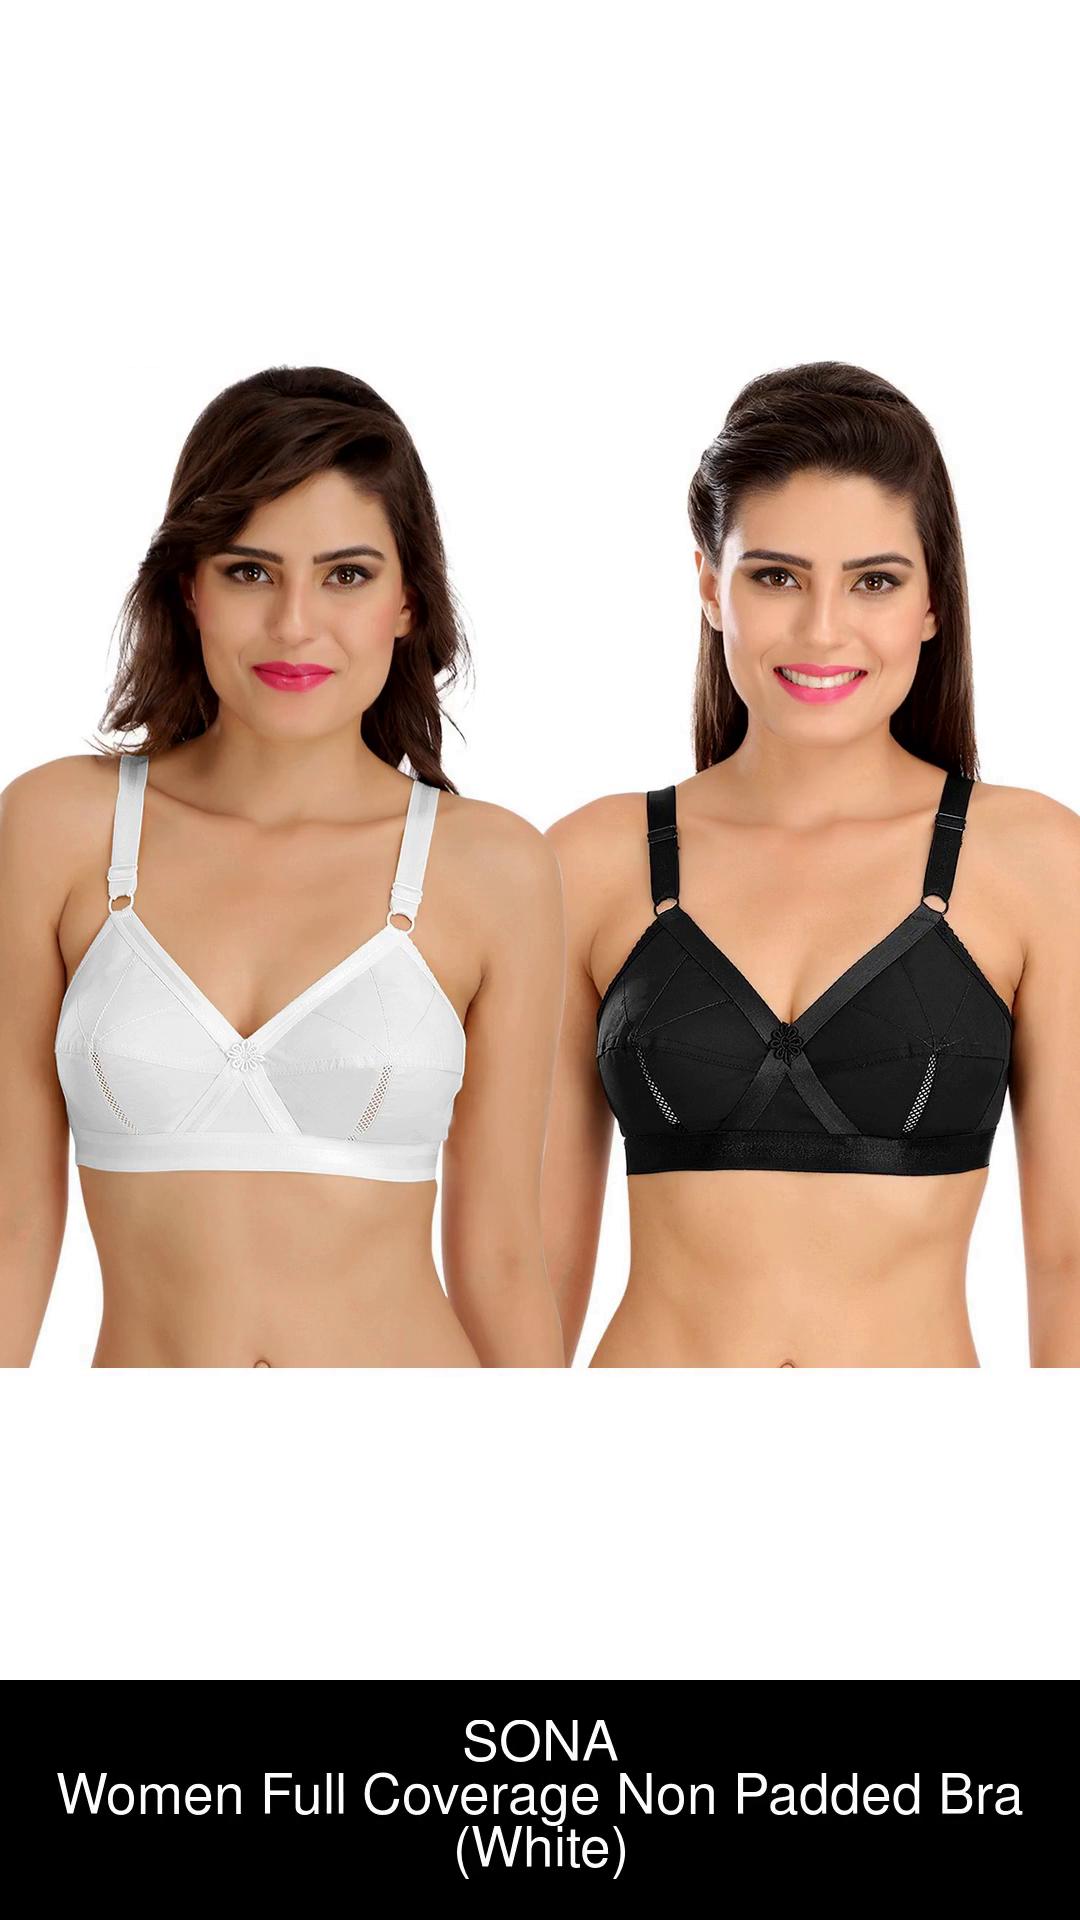 SONA Women's Perfecto Cotton Full Coverage Bra Women Everyday Non Padded Bra  - Buy SONA Women's Perfecto Cotton Full Coverage Bra Women Everyday Non  Padded Bra Online at Best Prices in India